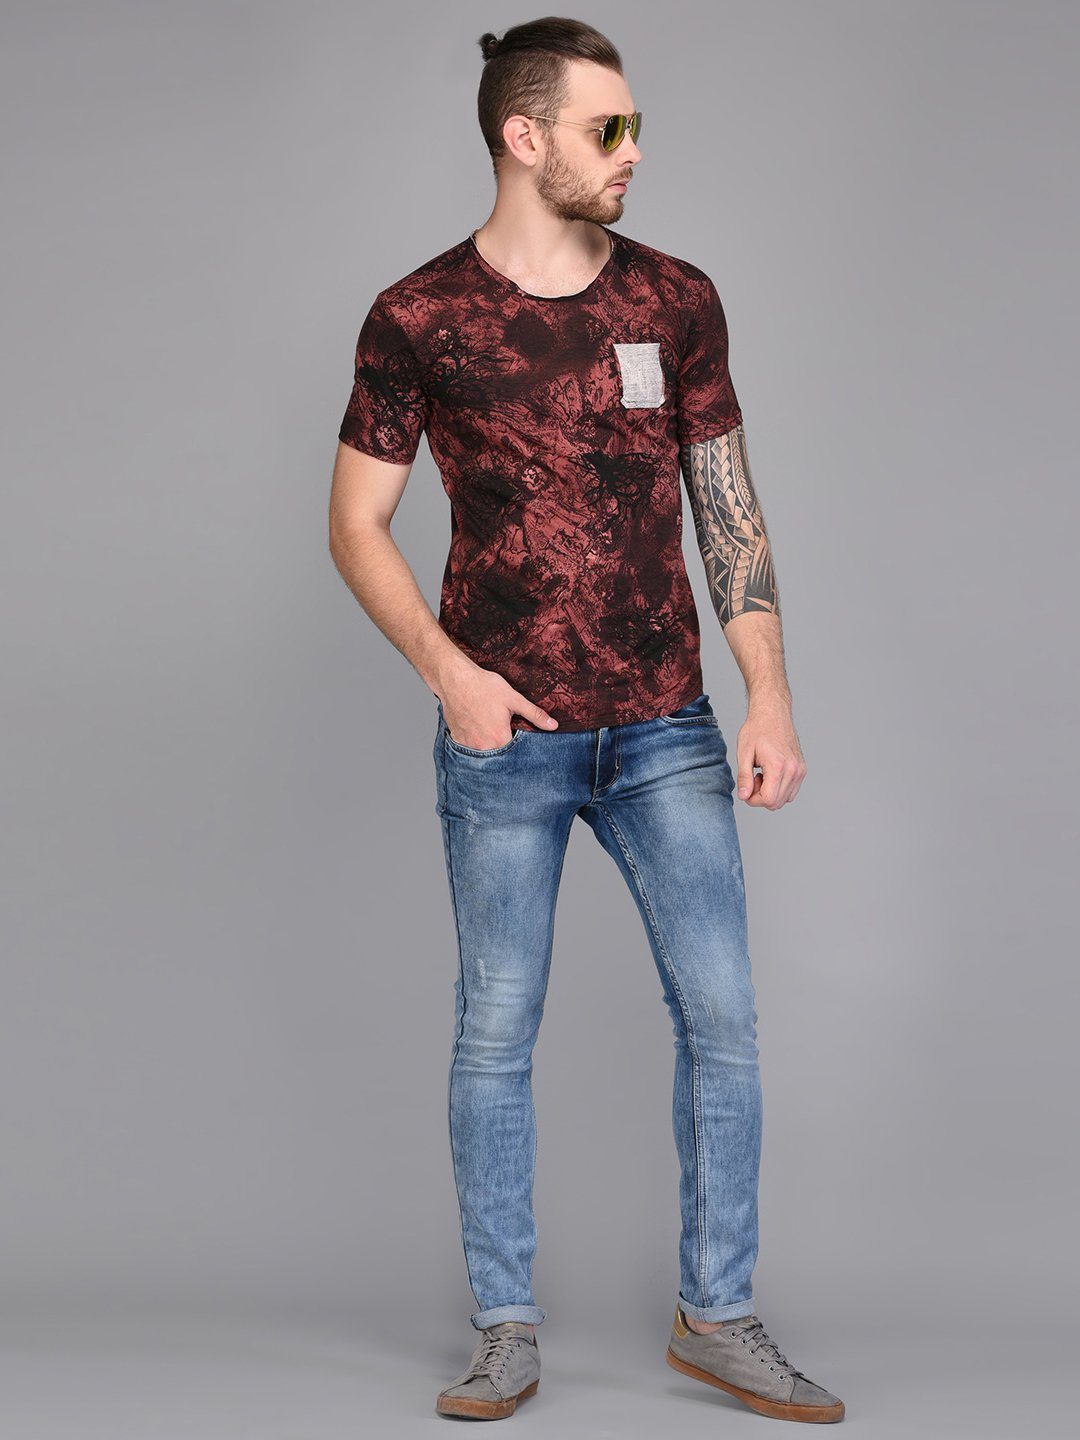 Dark Floral Printed T-shirt with Contrast Pocket detail